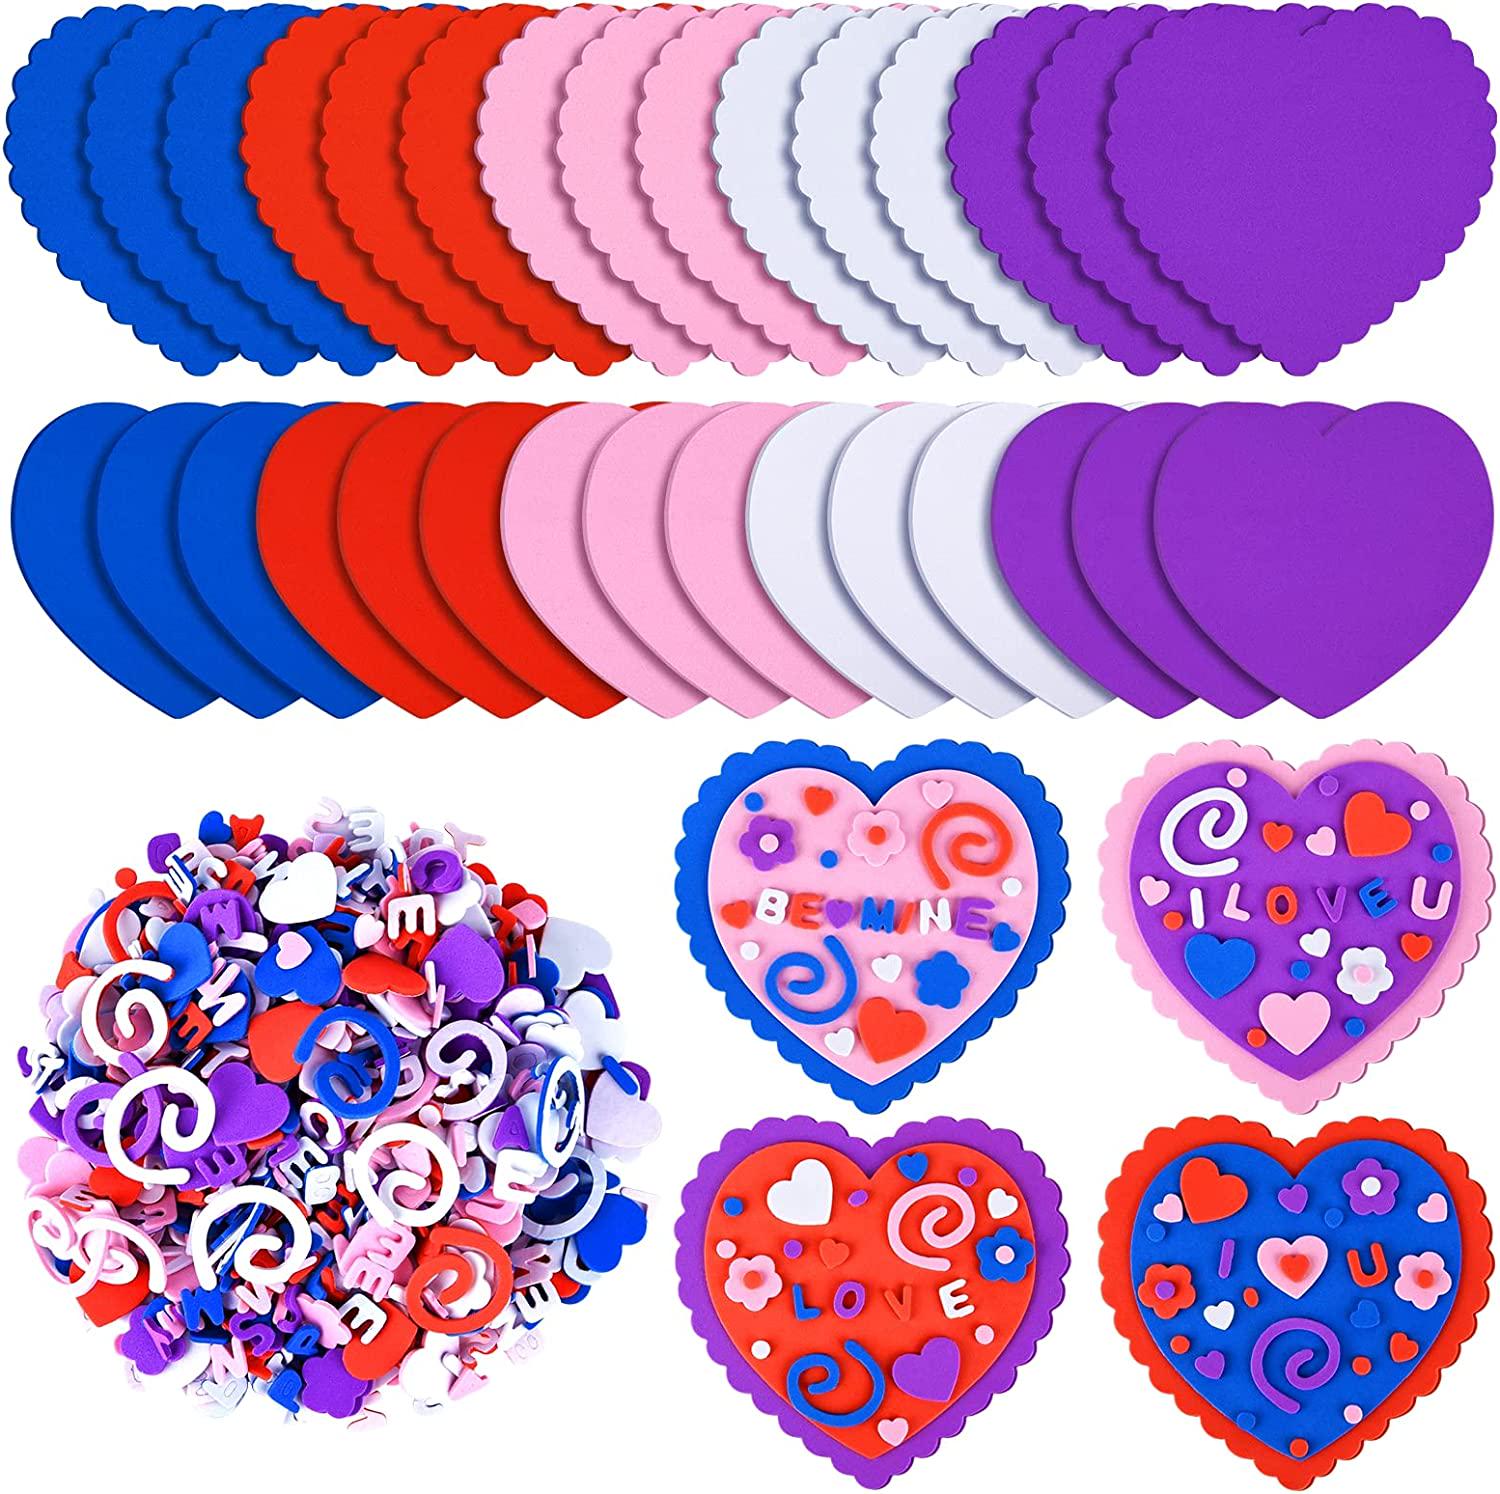 ELECLAND, ELECLAND 930 Pcs Valentines Day Foam Heart Craft Kit 30 Pieces Large Foam Hearts and 900 Pieces Self-Adhesive Small Foam Stickers for Valentine's Day Crafts for Kids DIY Supplies